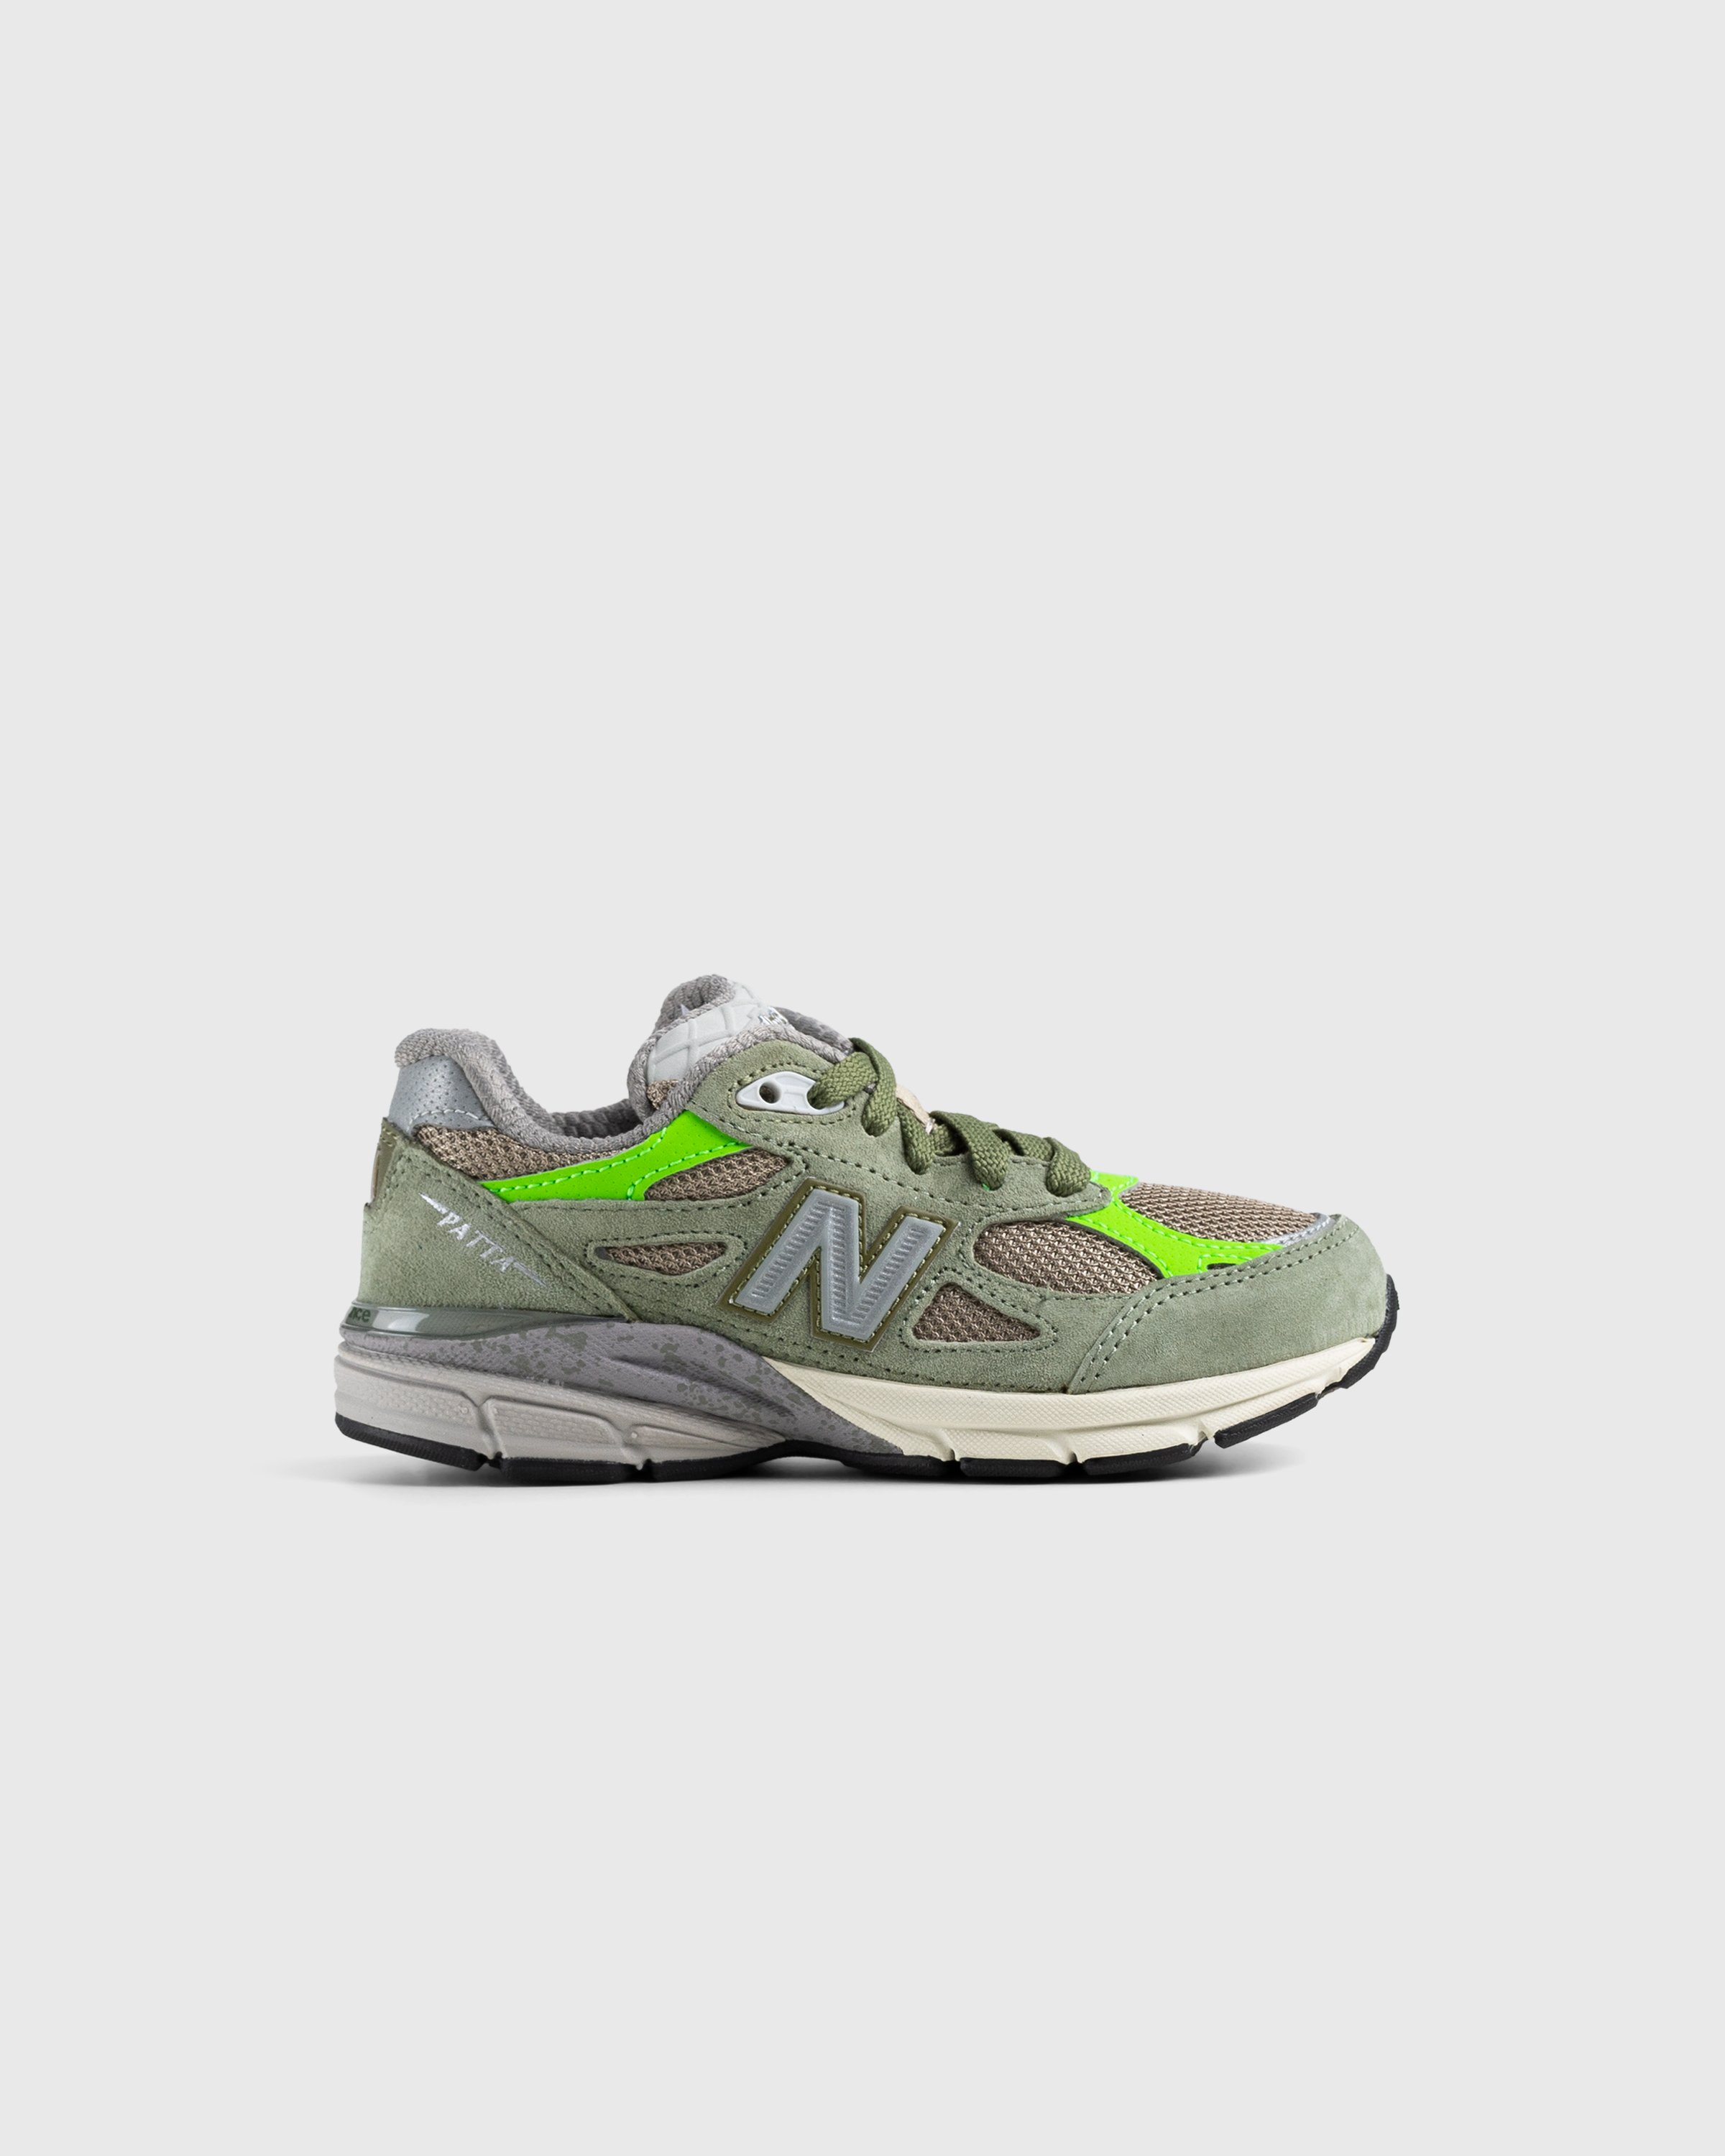 Patta x New Balance - Made in USA 990v3 Olive/White Pepper - Footwear - Green - Image 1